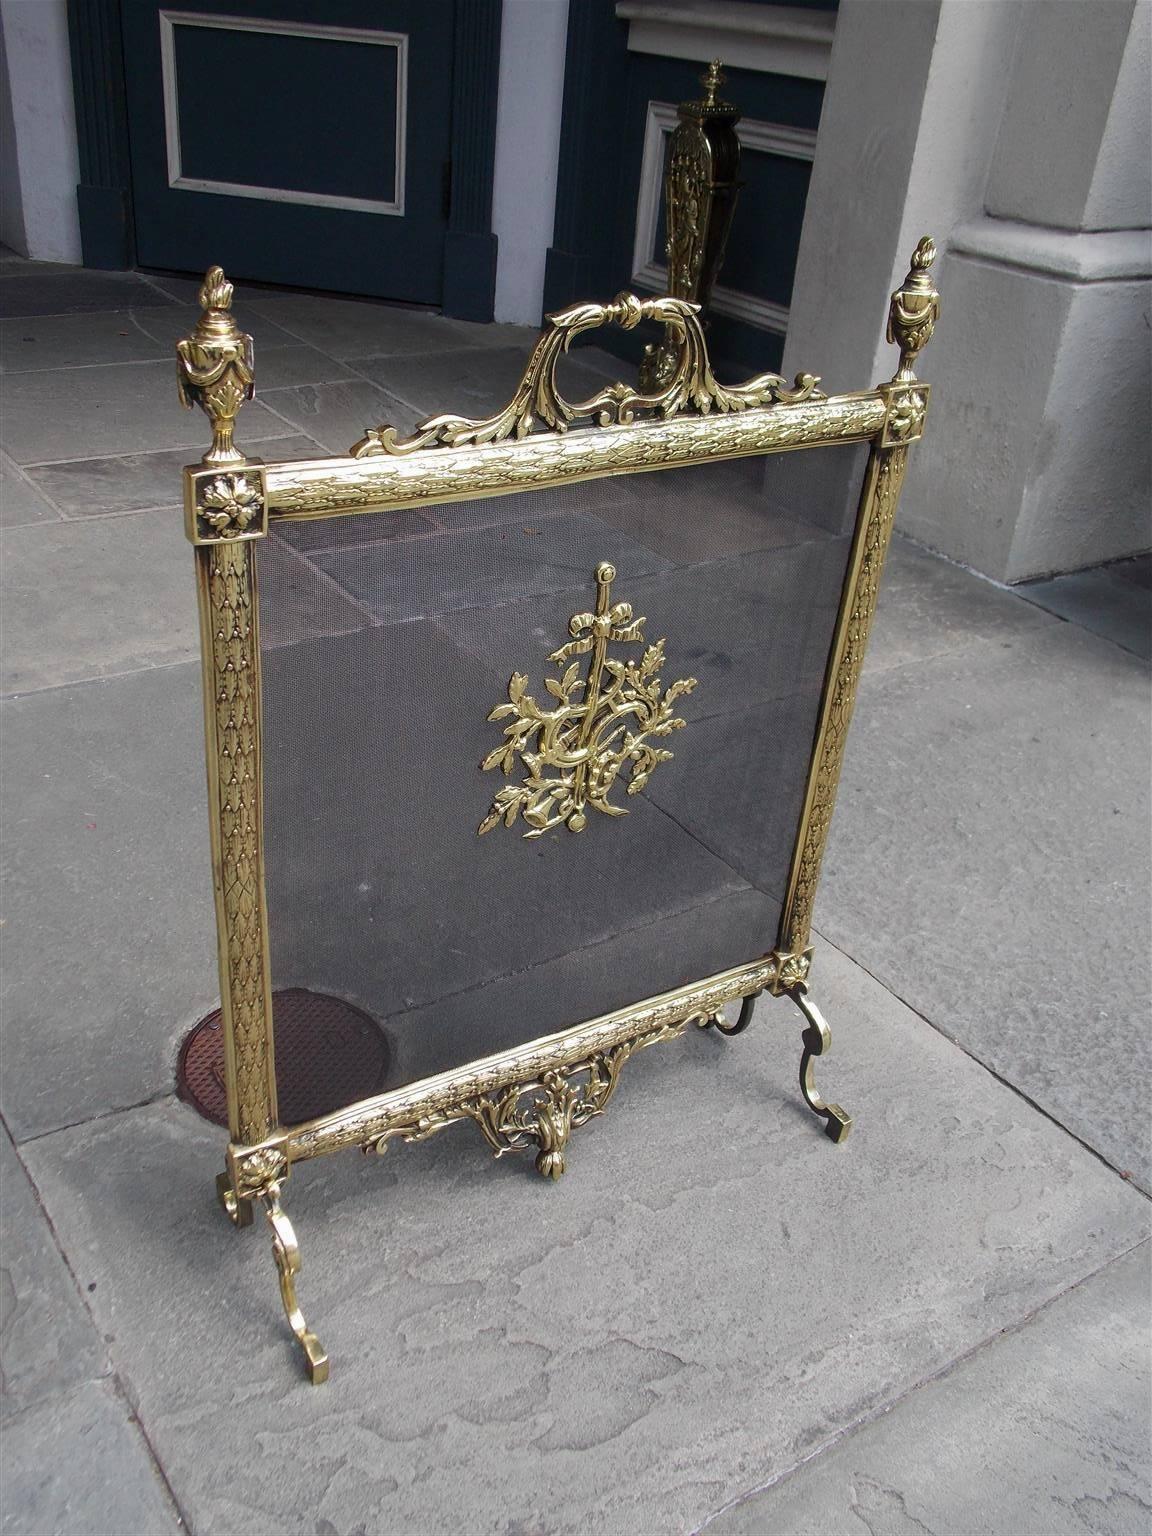 French brass freestanding fire screen with acanthus scrolled centered handle, flanking flame urn swag finials, corner floral medallions, centered decorative ribbon with floral lyre motif, and terminating on flanking scrolled legs with a lower